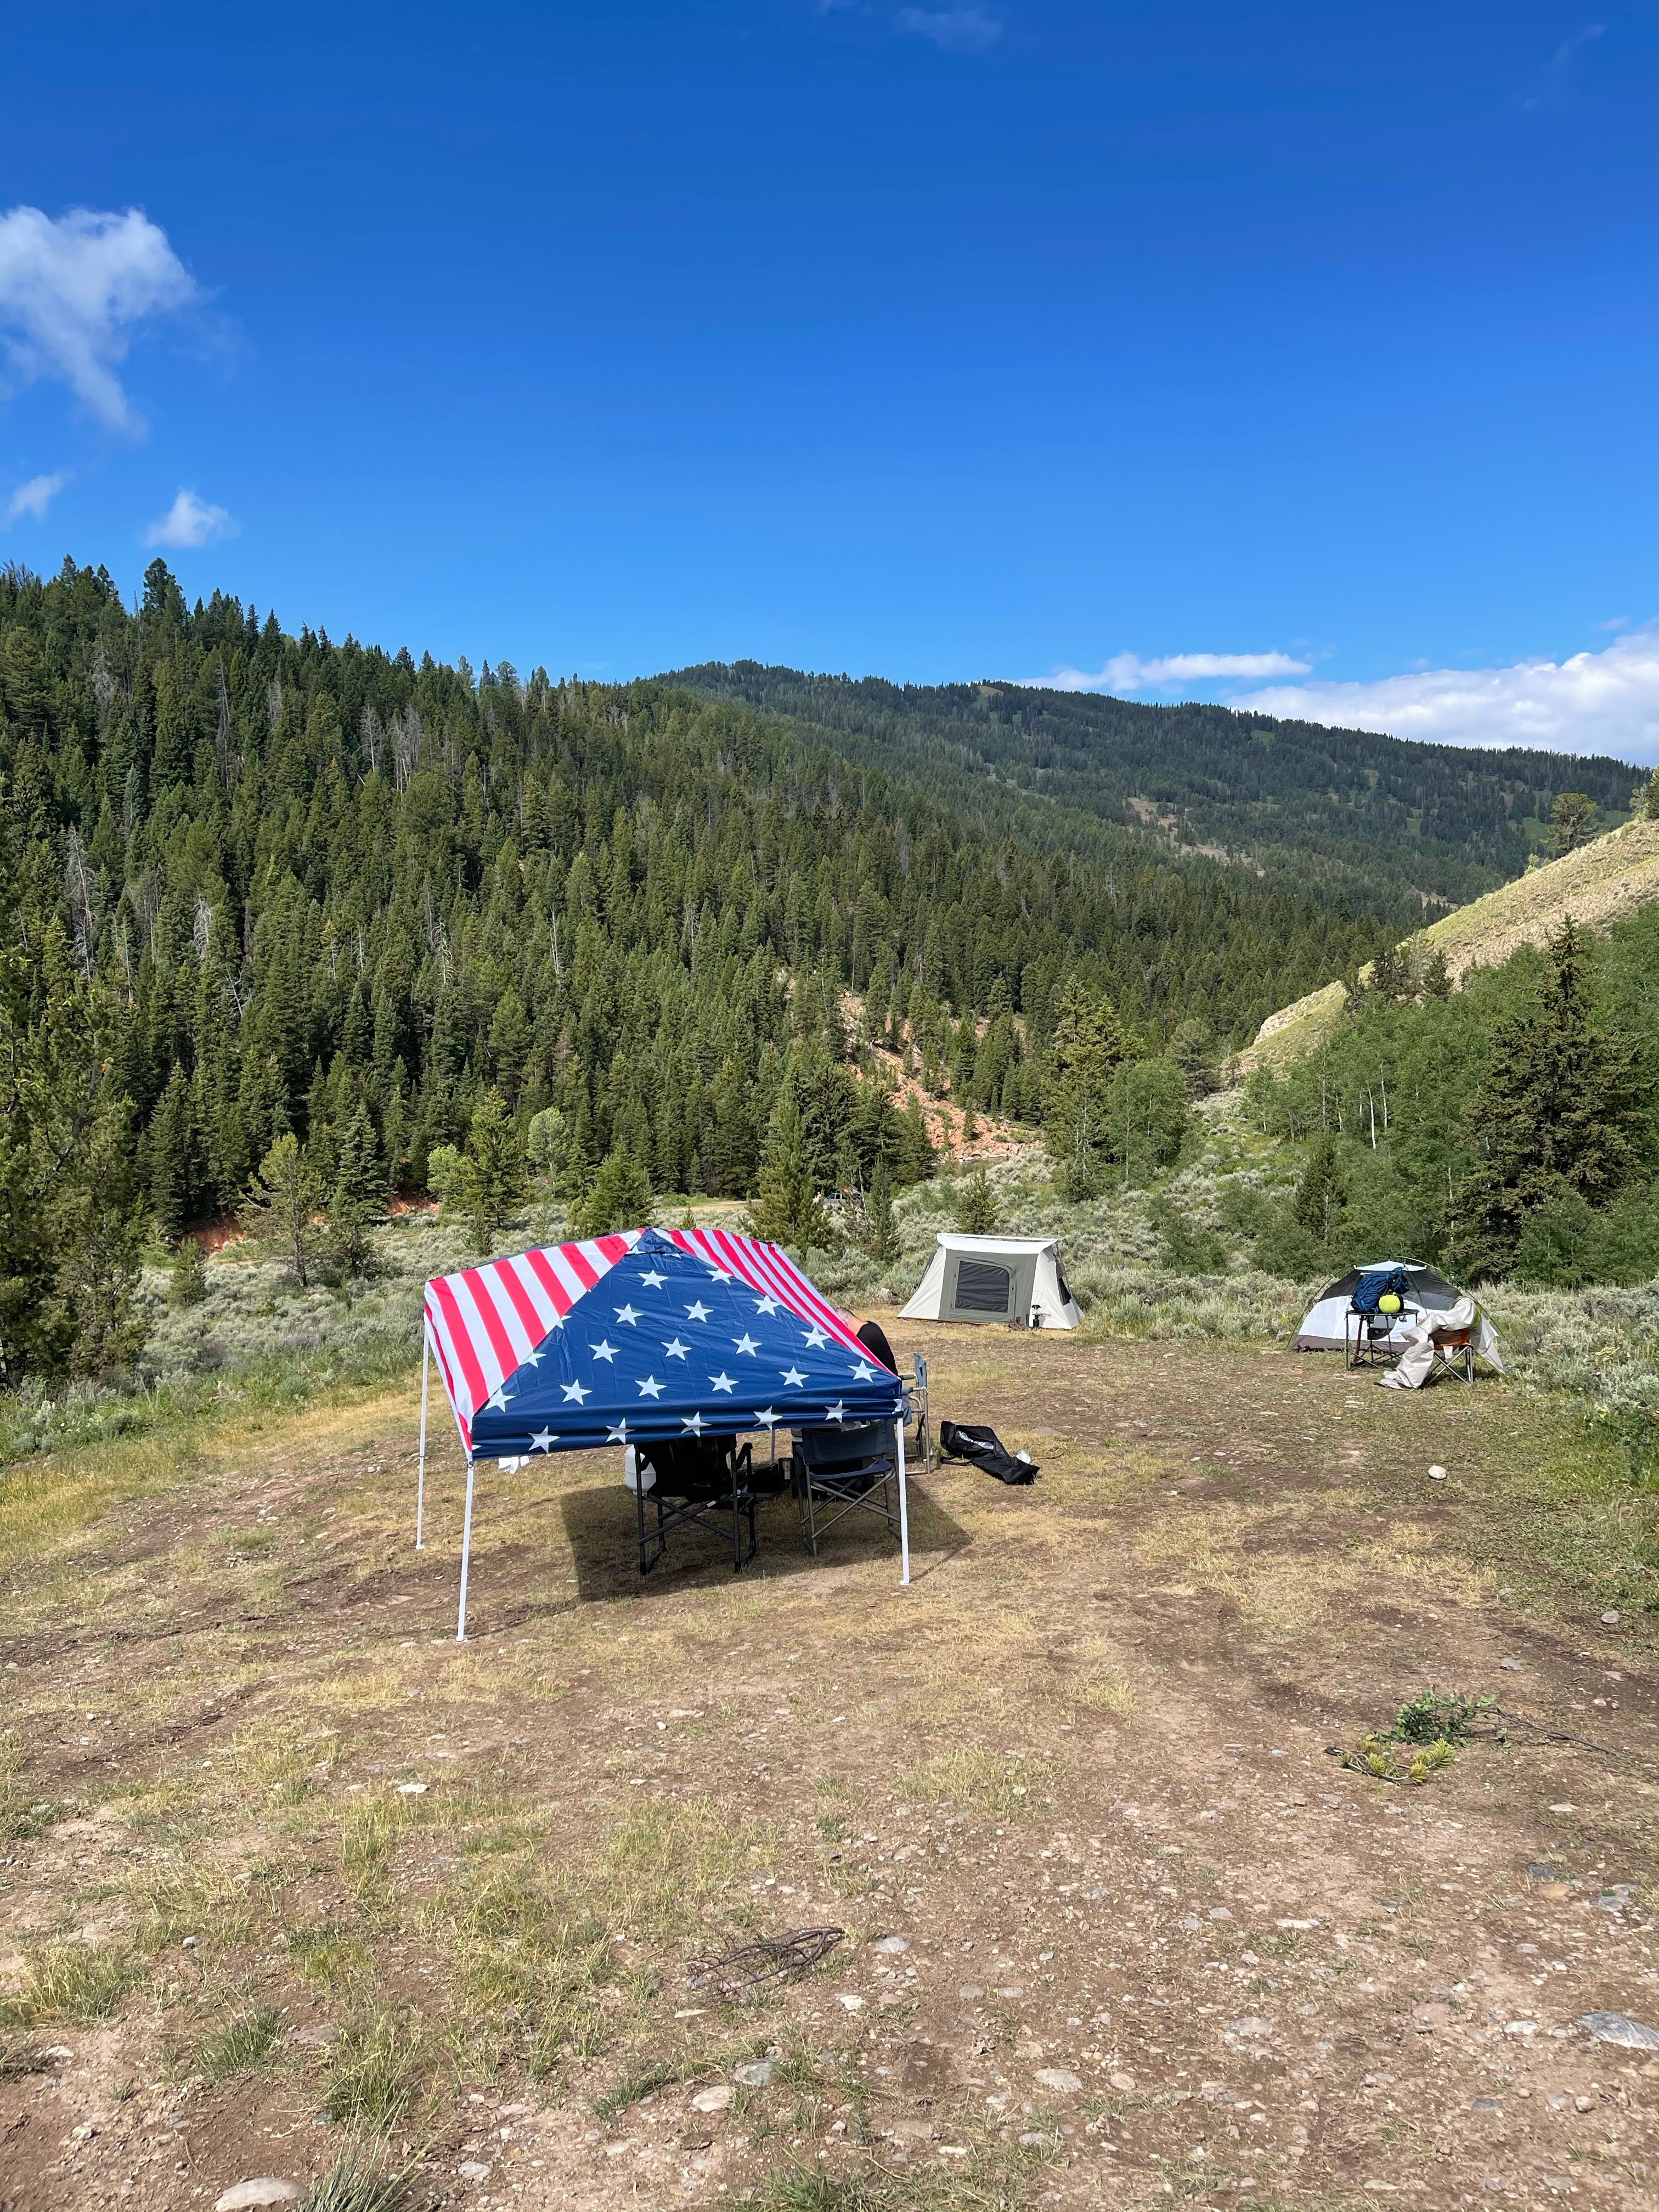 Camper submitted image from Gros Ventre Wilderness - 5